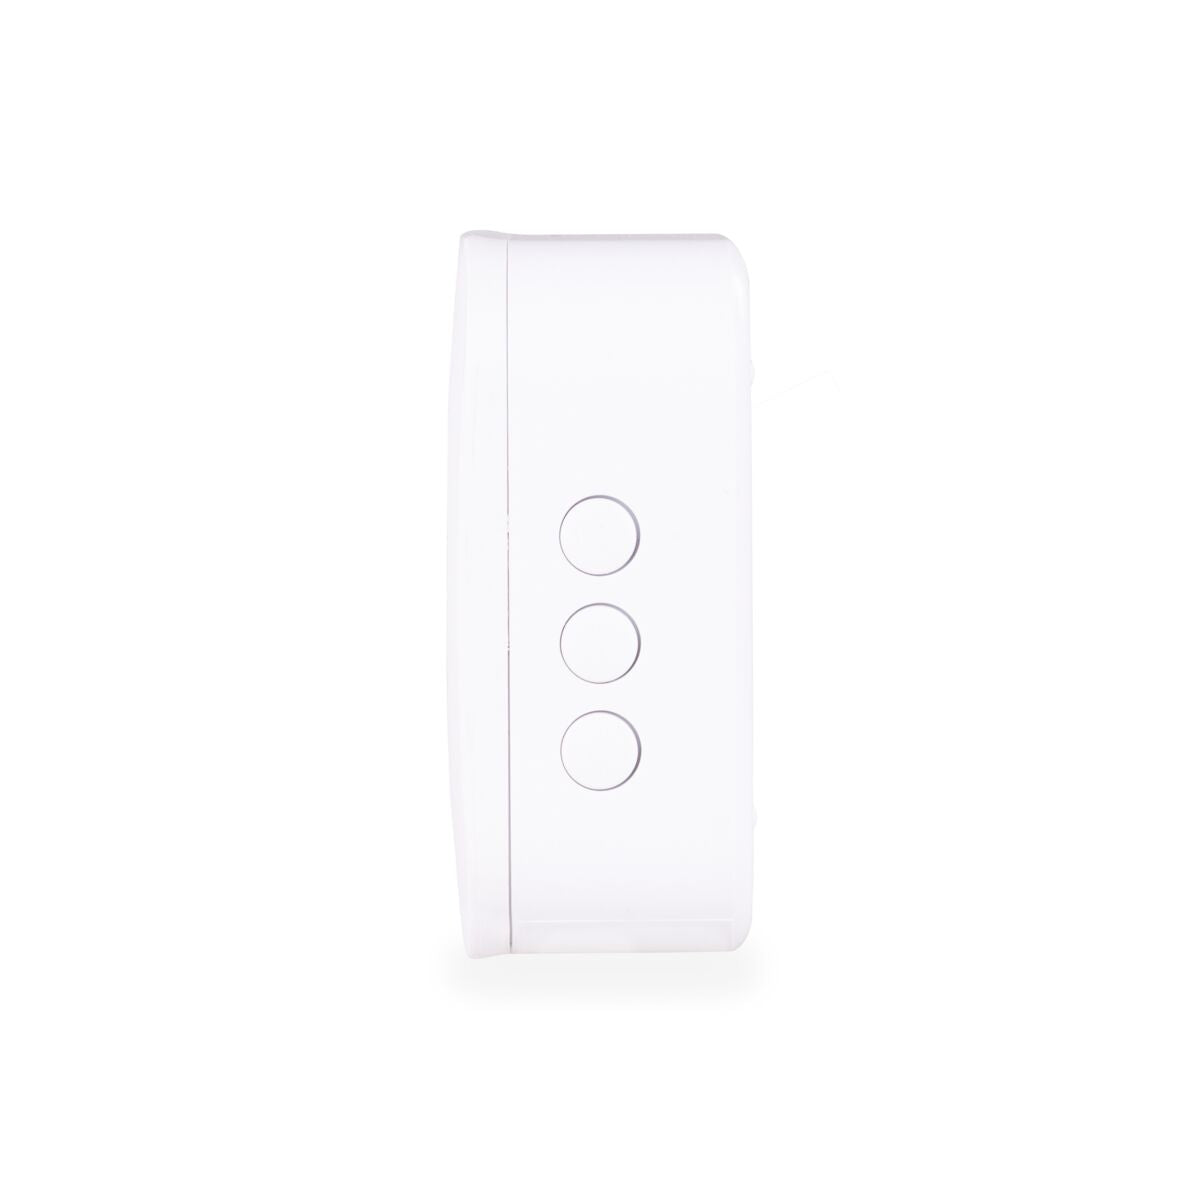 Bell ME WHT - Wireless bell - Chime for Buzz LO - Side View Image with buttons | Marmitek